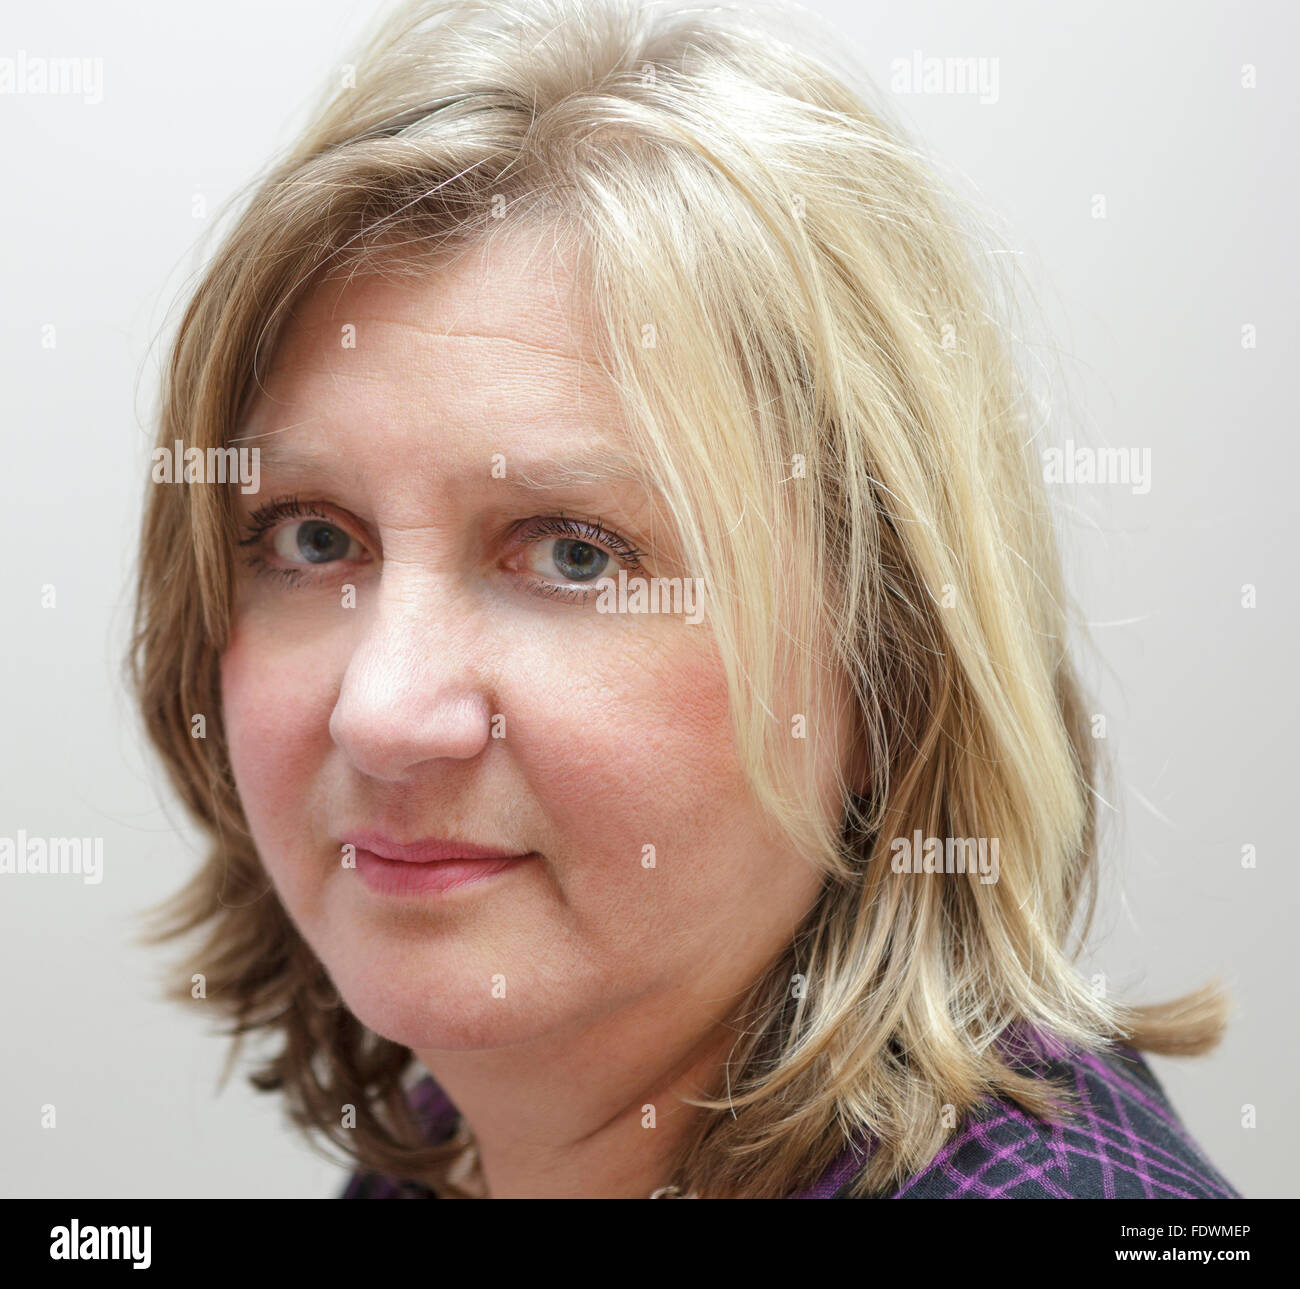 Mature woman portrait.  Model Release: Yes.  Property release: No. Stock Photo